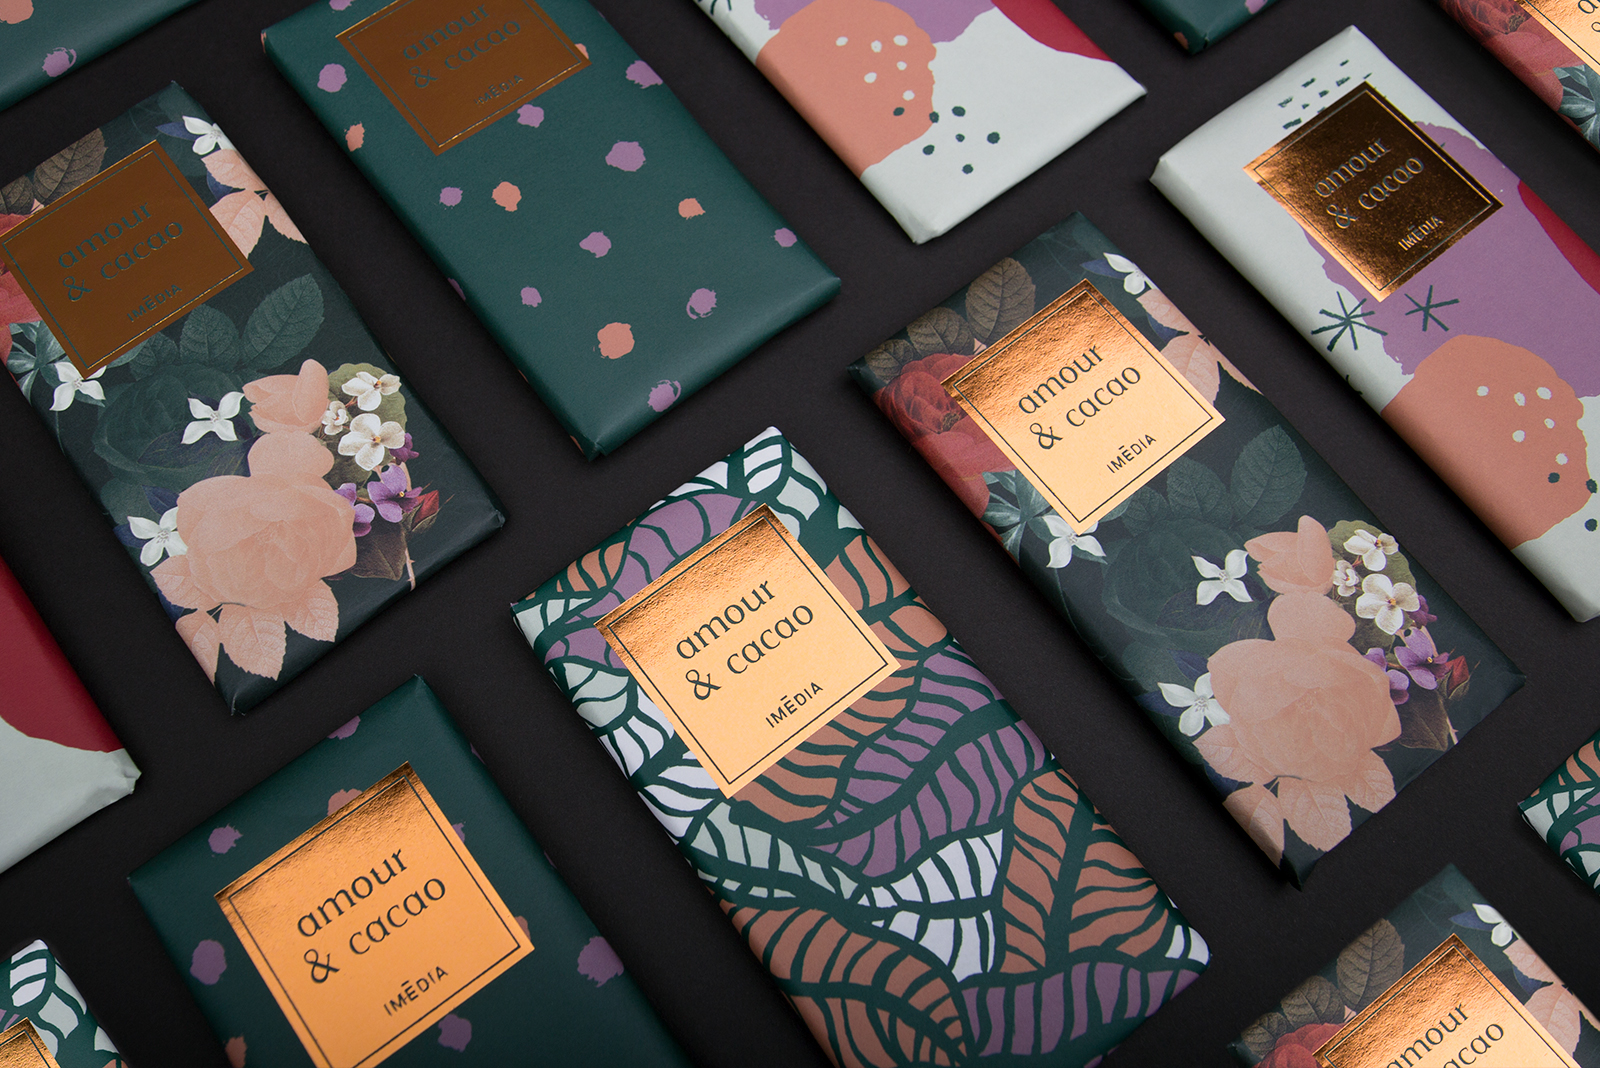 Illustration and Graphic Design: Amour and Cacao